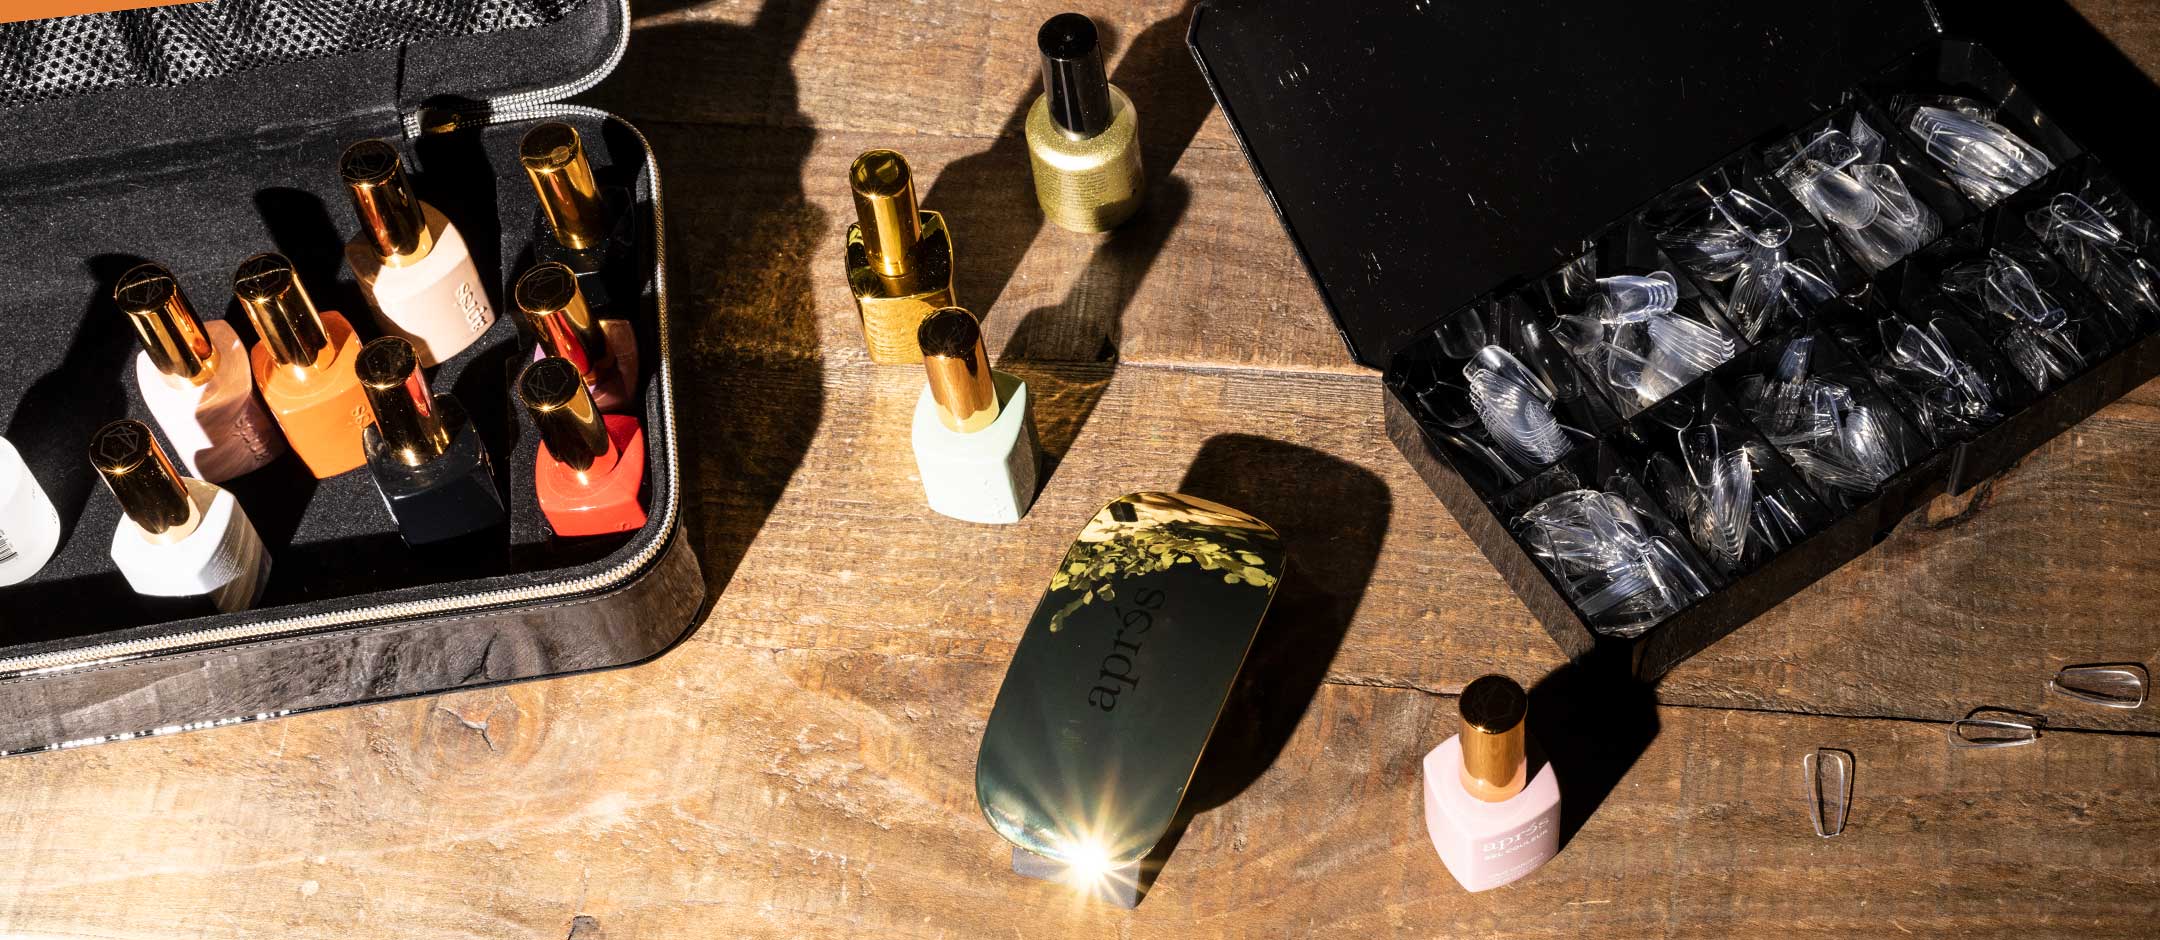 DIY Manicure and Hair Color Options Bring the Salon Home